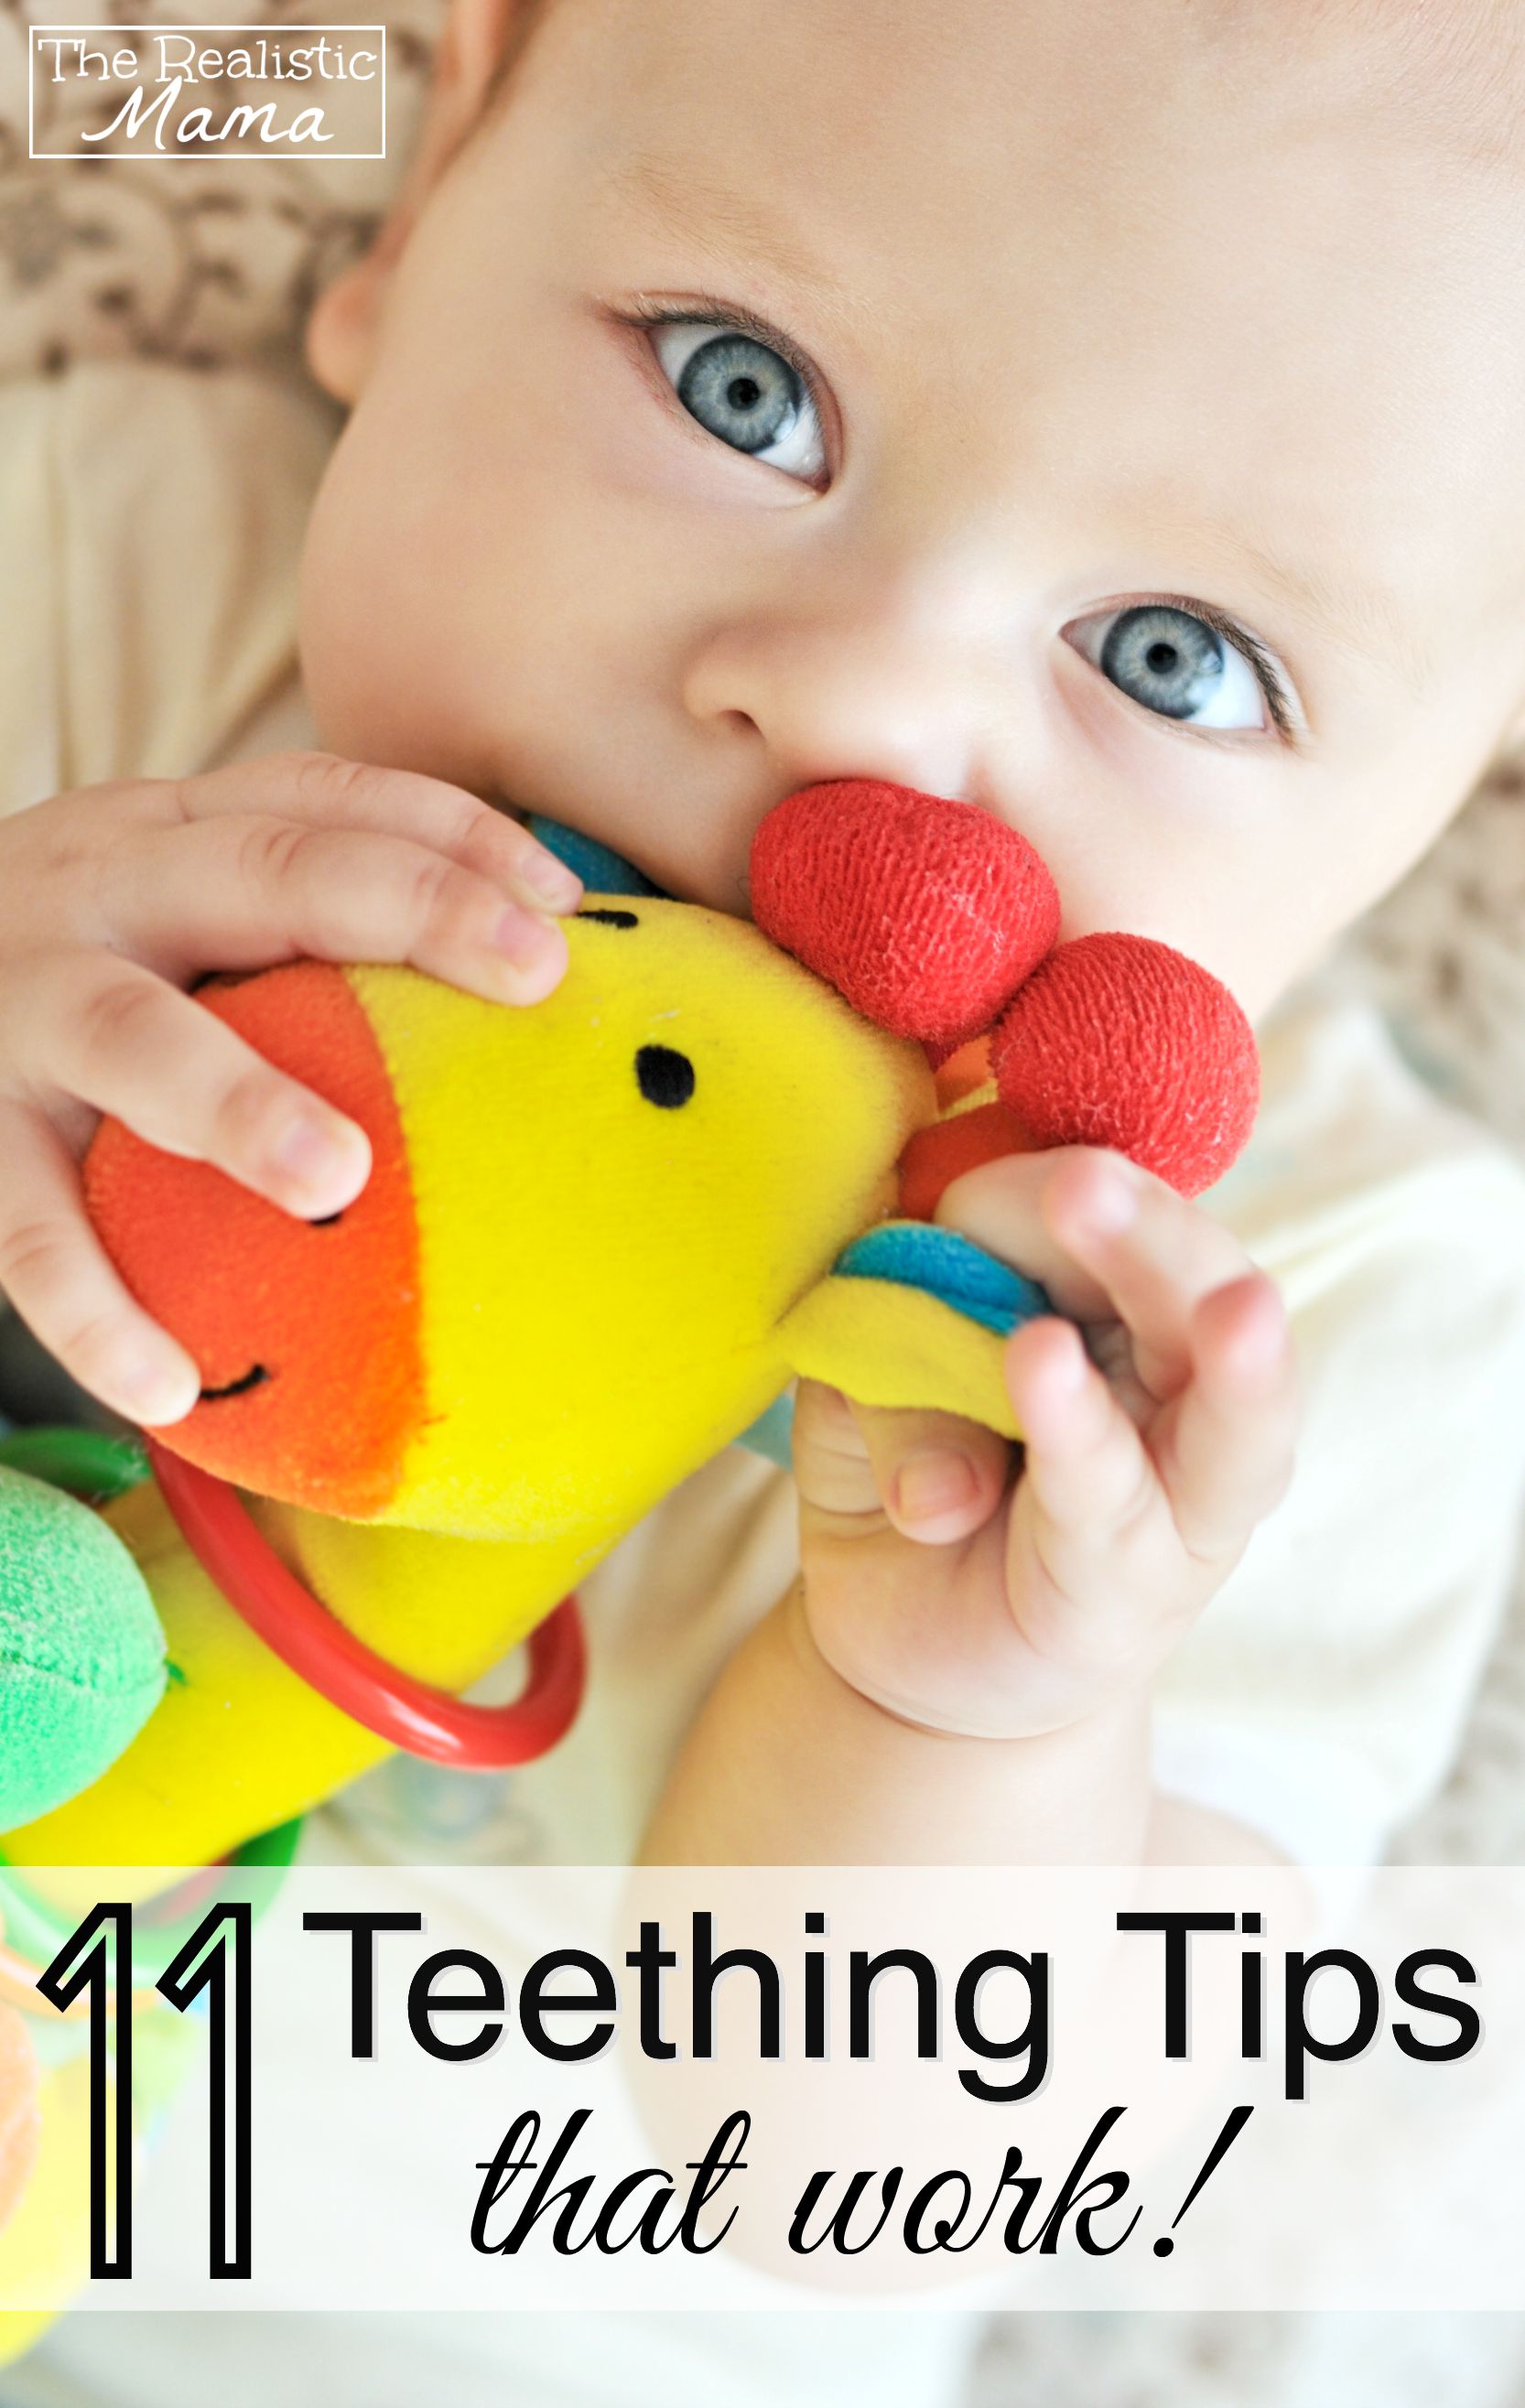 Teething tips and tricks that actually worked for us.